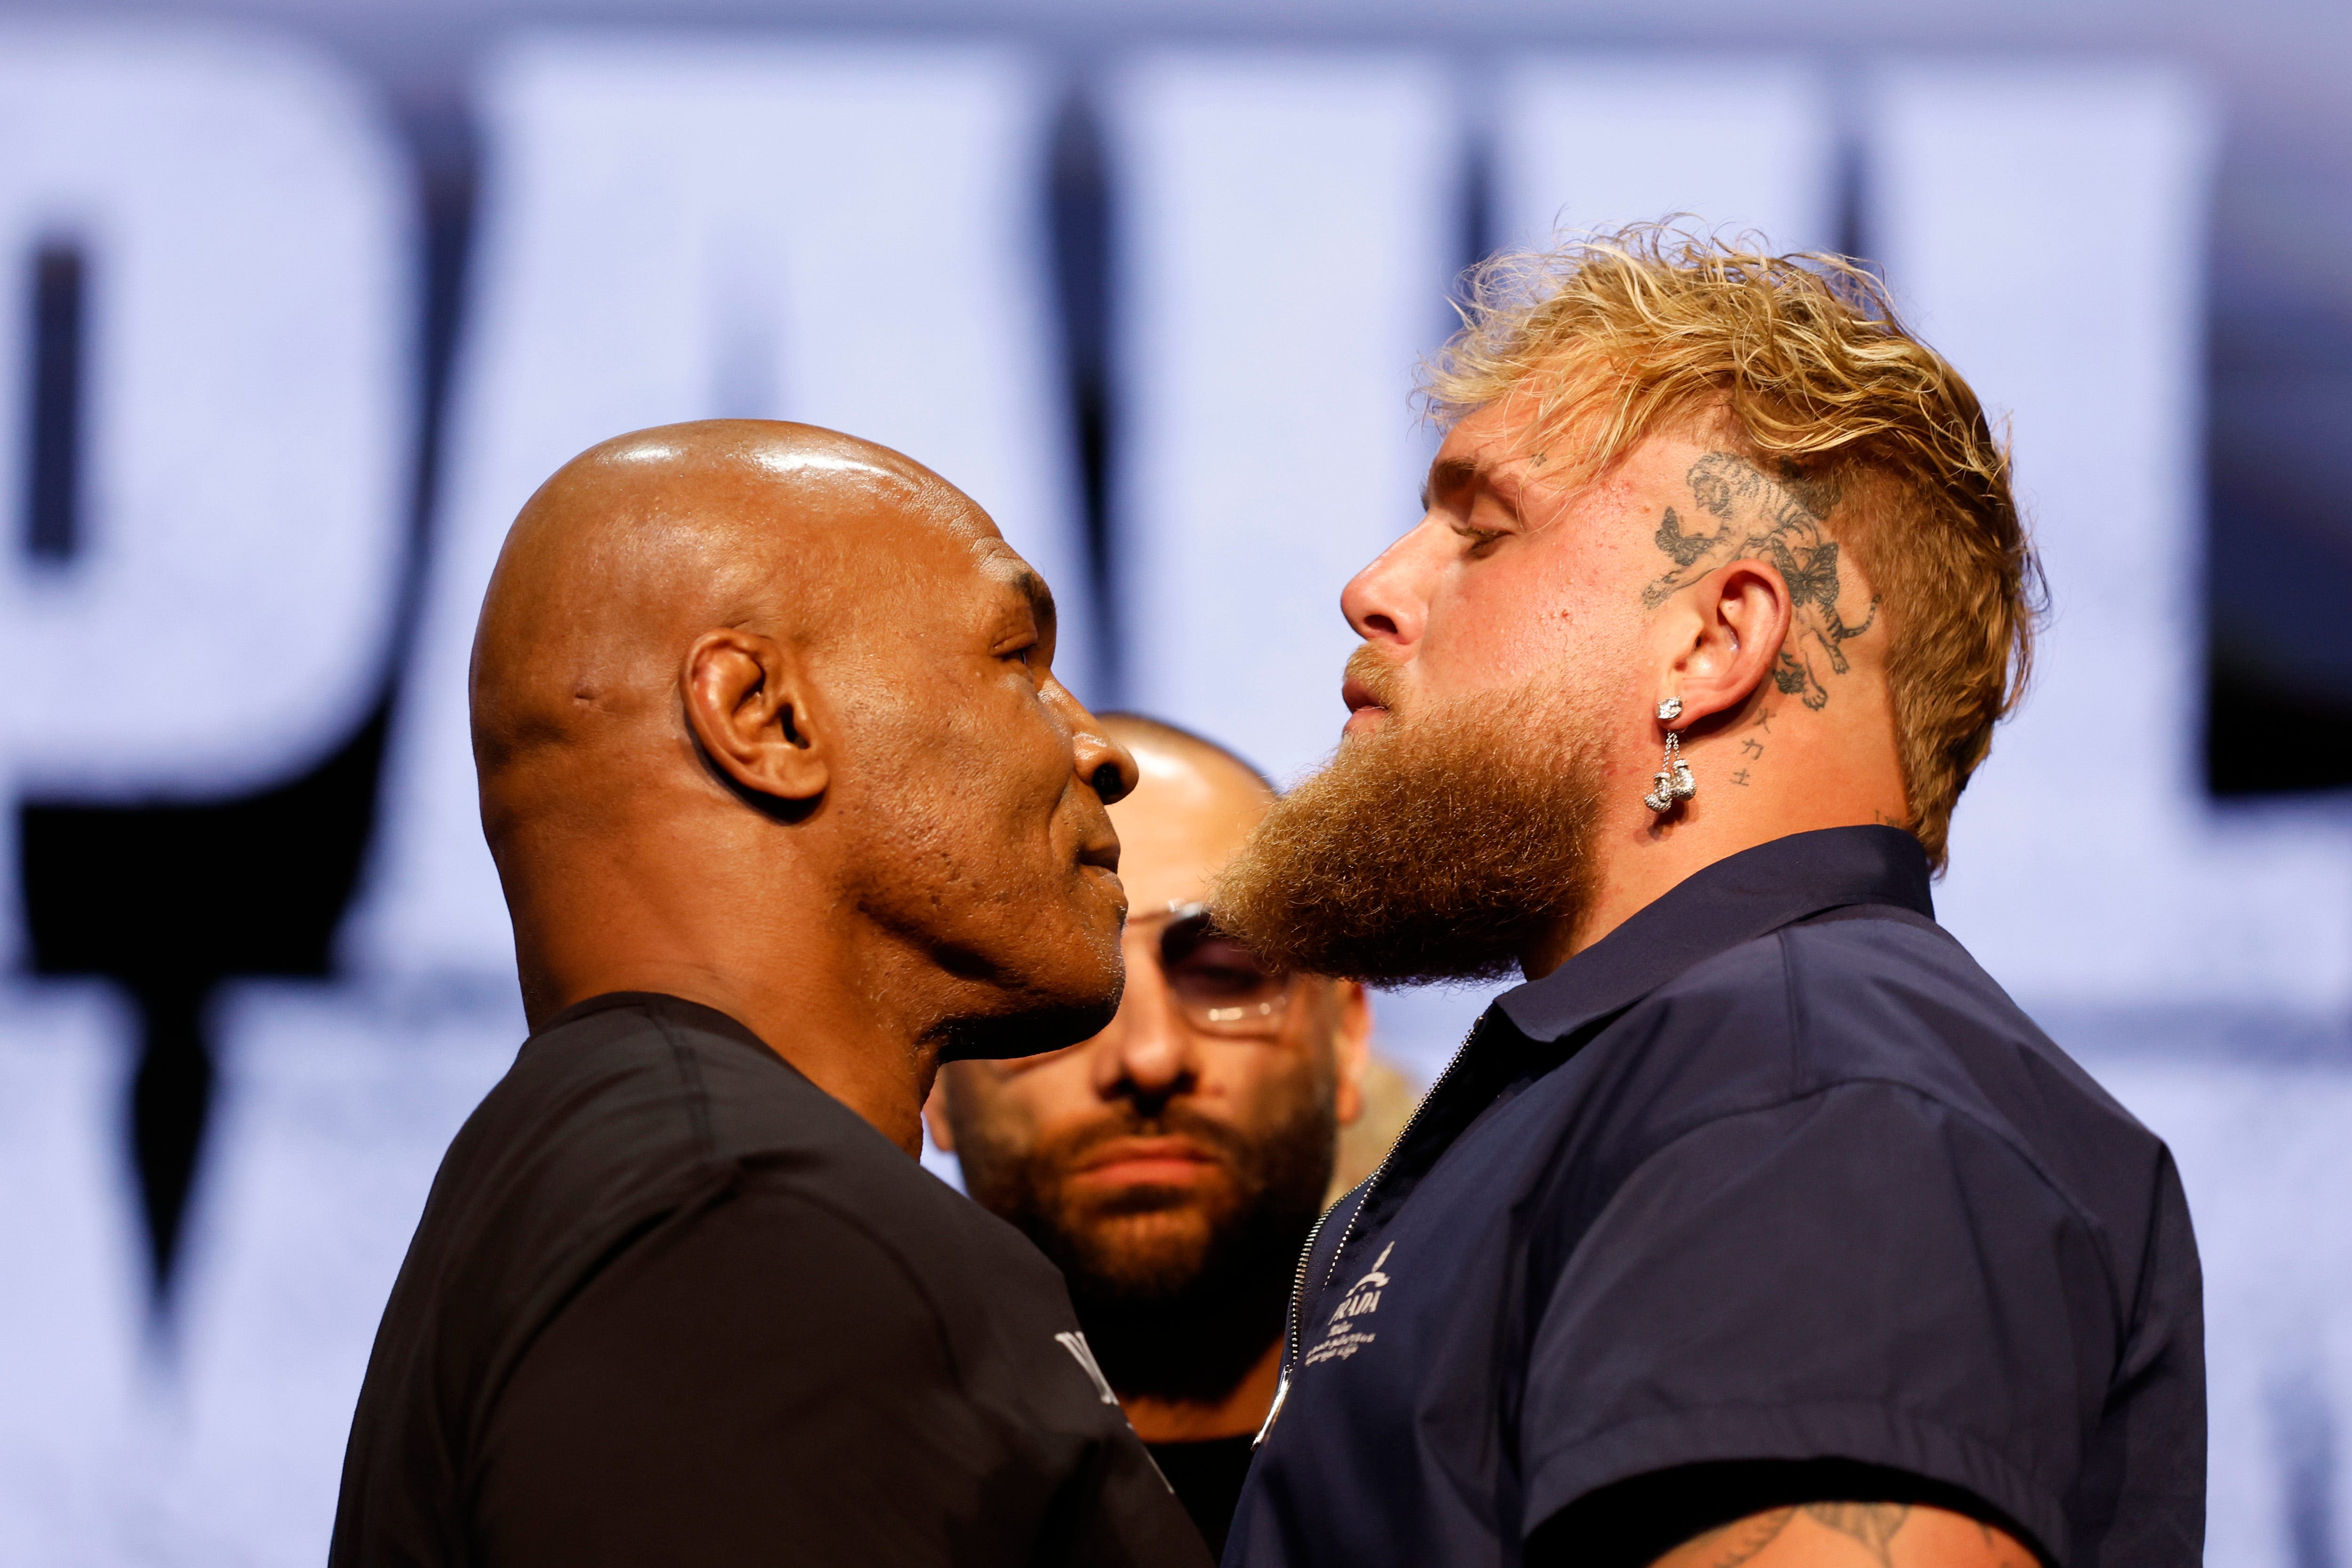 Mike Tyson, Jake Paul meet face to face in New York ahead of July 20 boxing match in Texas